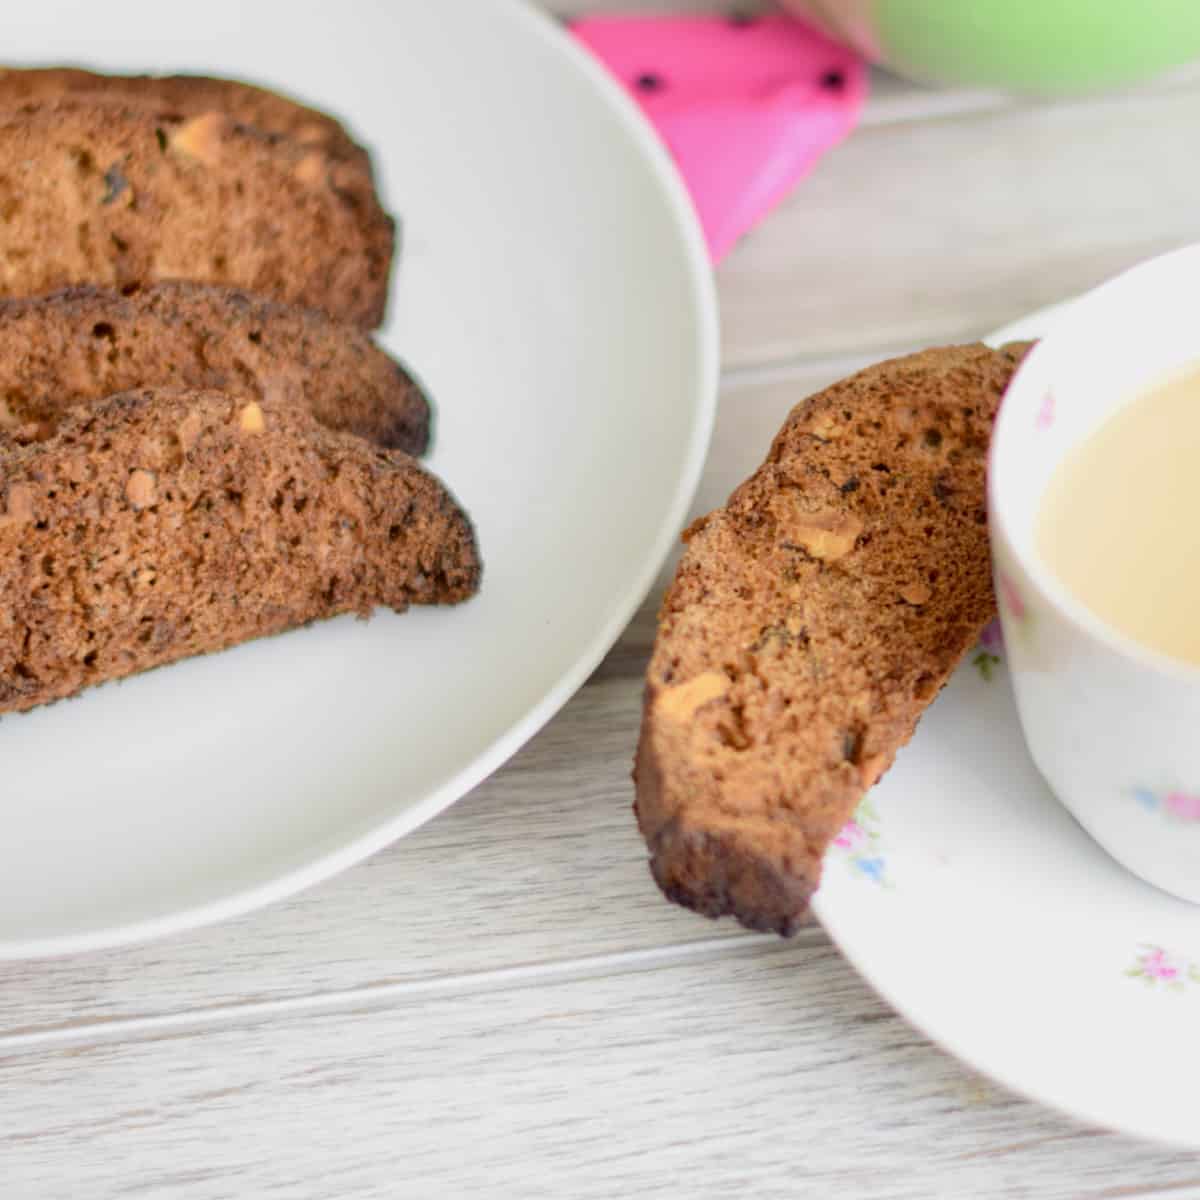 Crispy zucchini carrot biscotti on a plate ready to enjoy with a cup of coffee or tea.